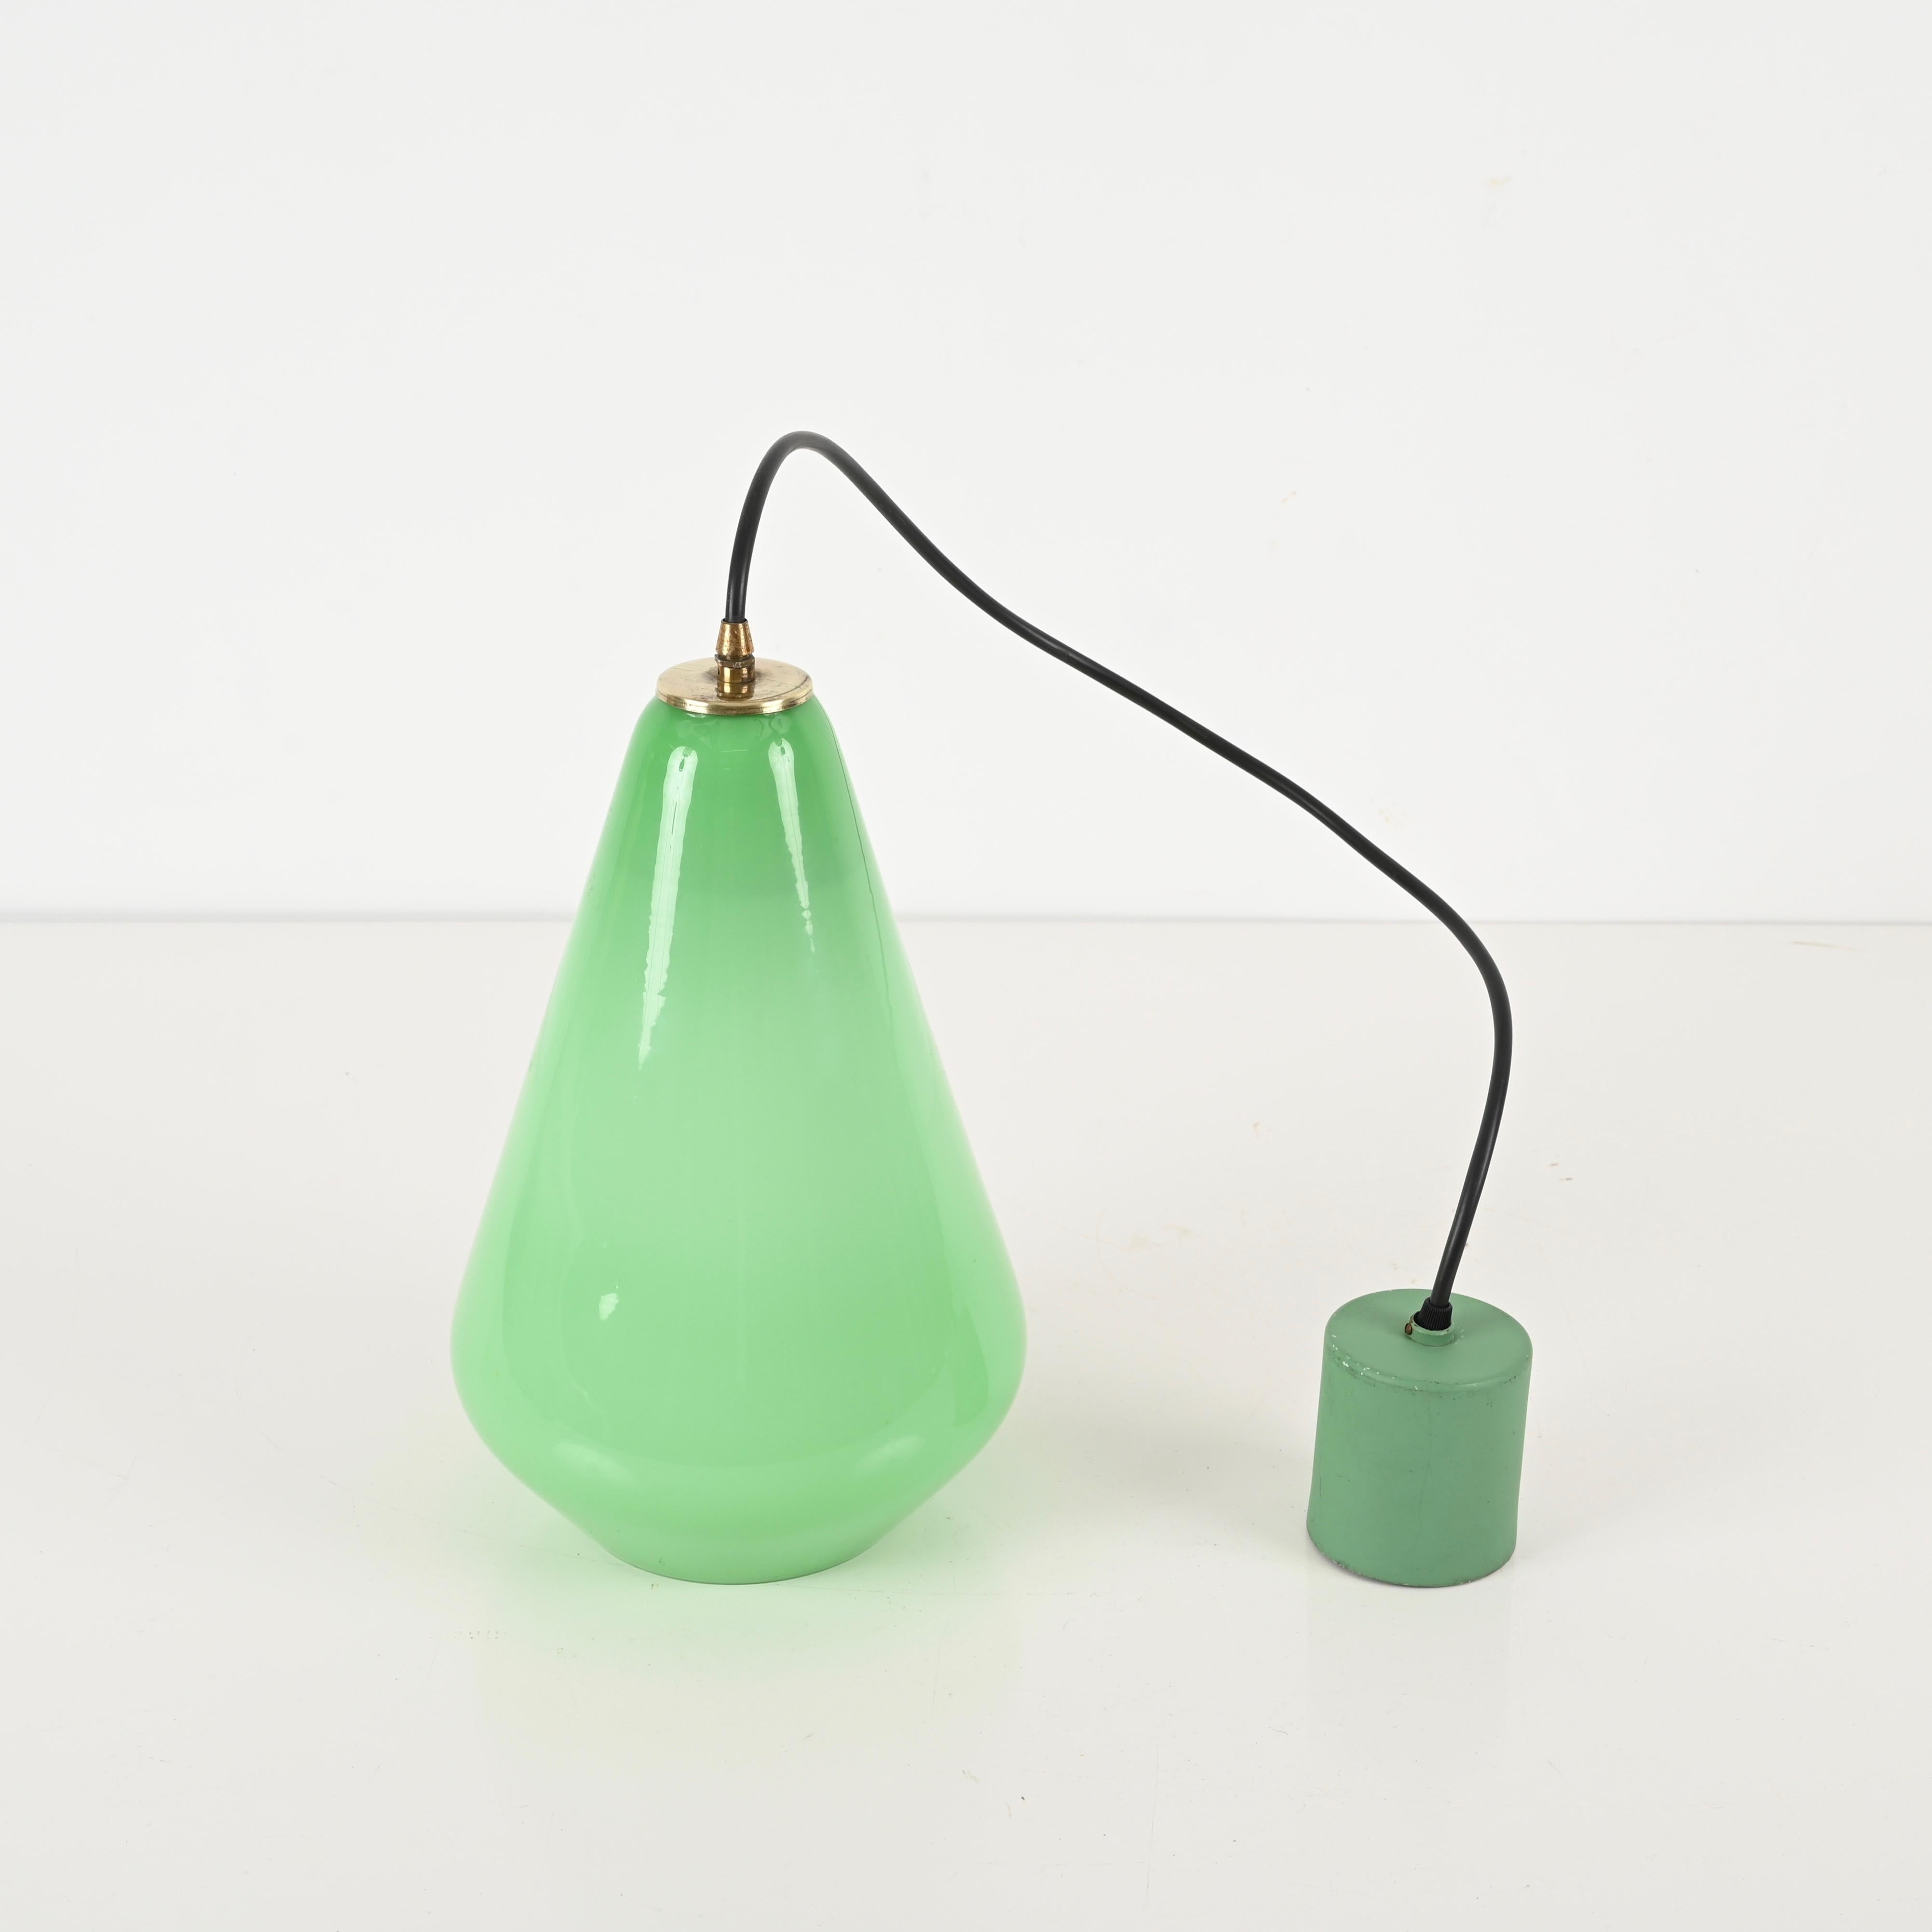 Green Murano Cased Glass and Brass Pendant Chandelier by Stilnovo, Italy 1950s For Sale 2